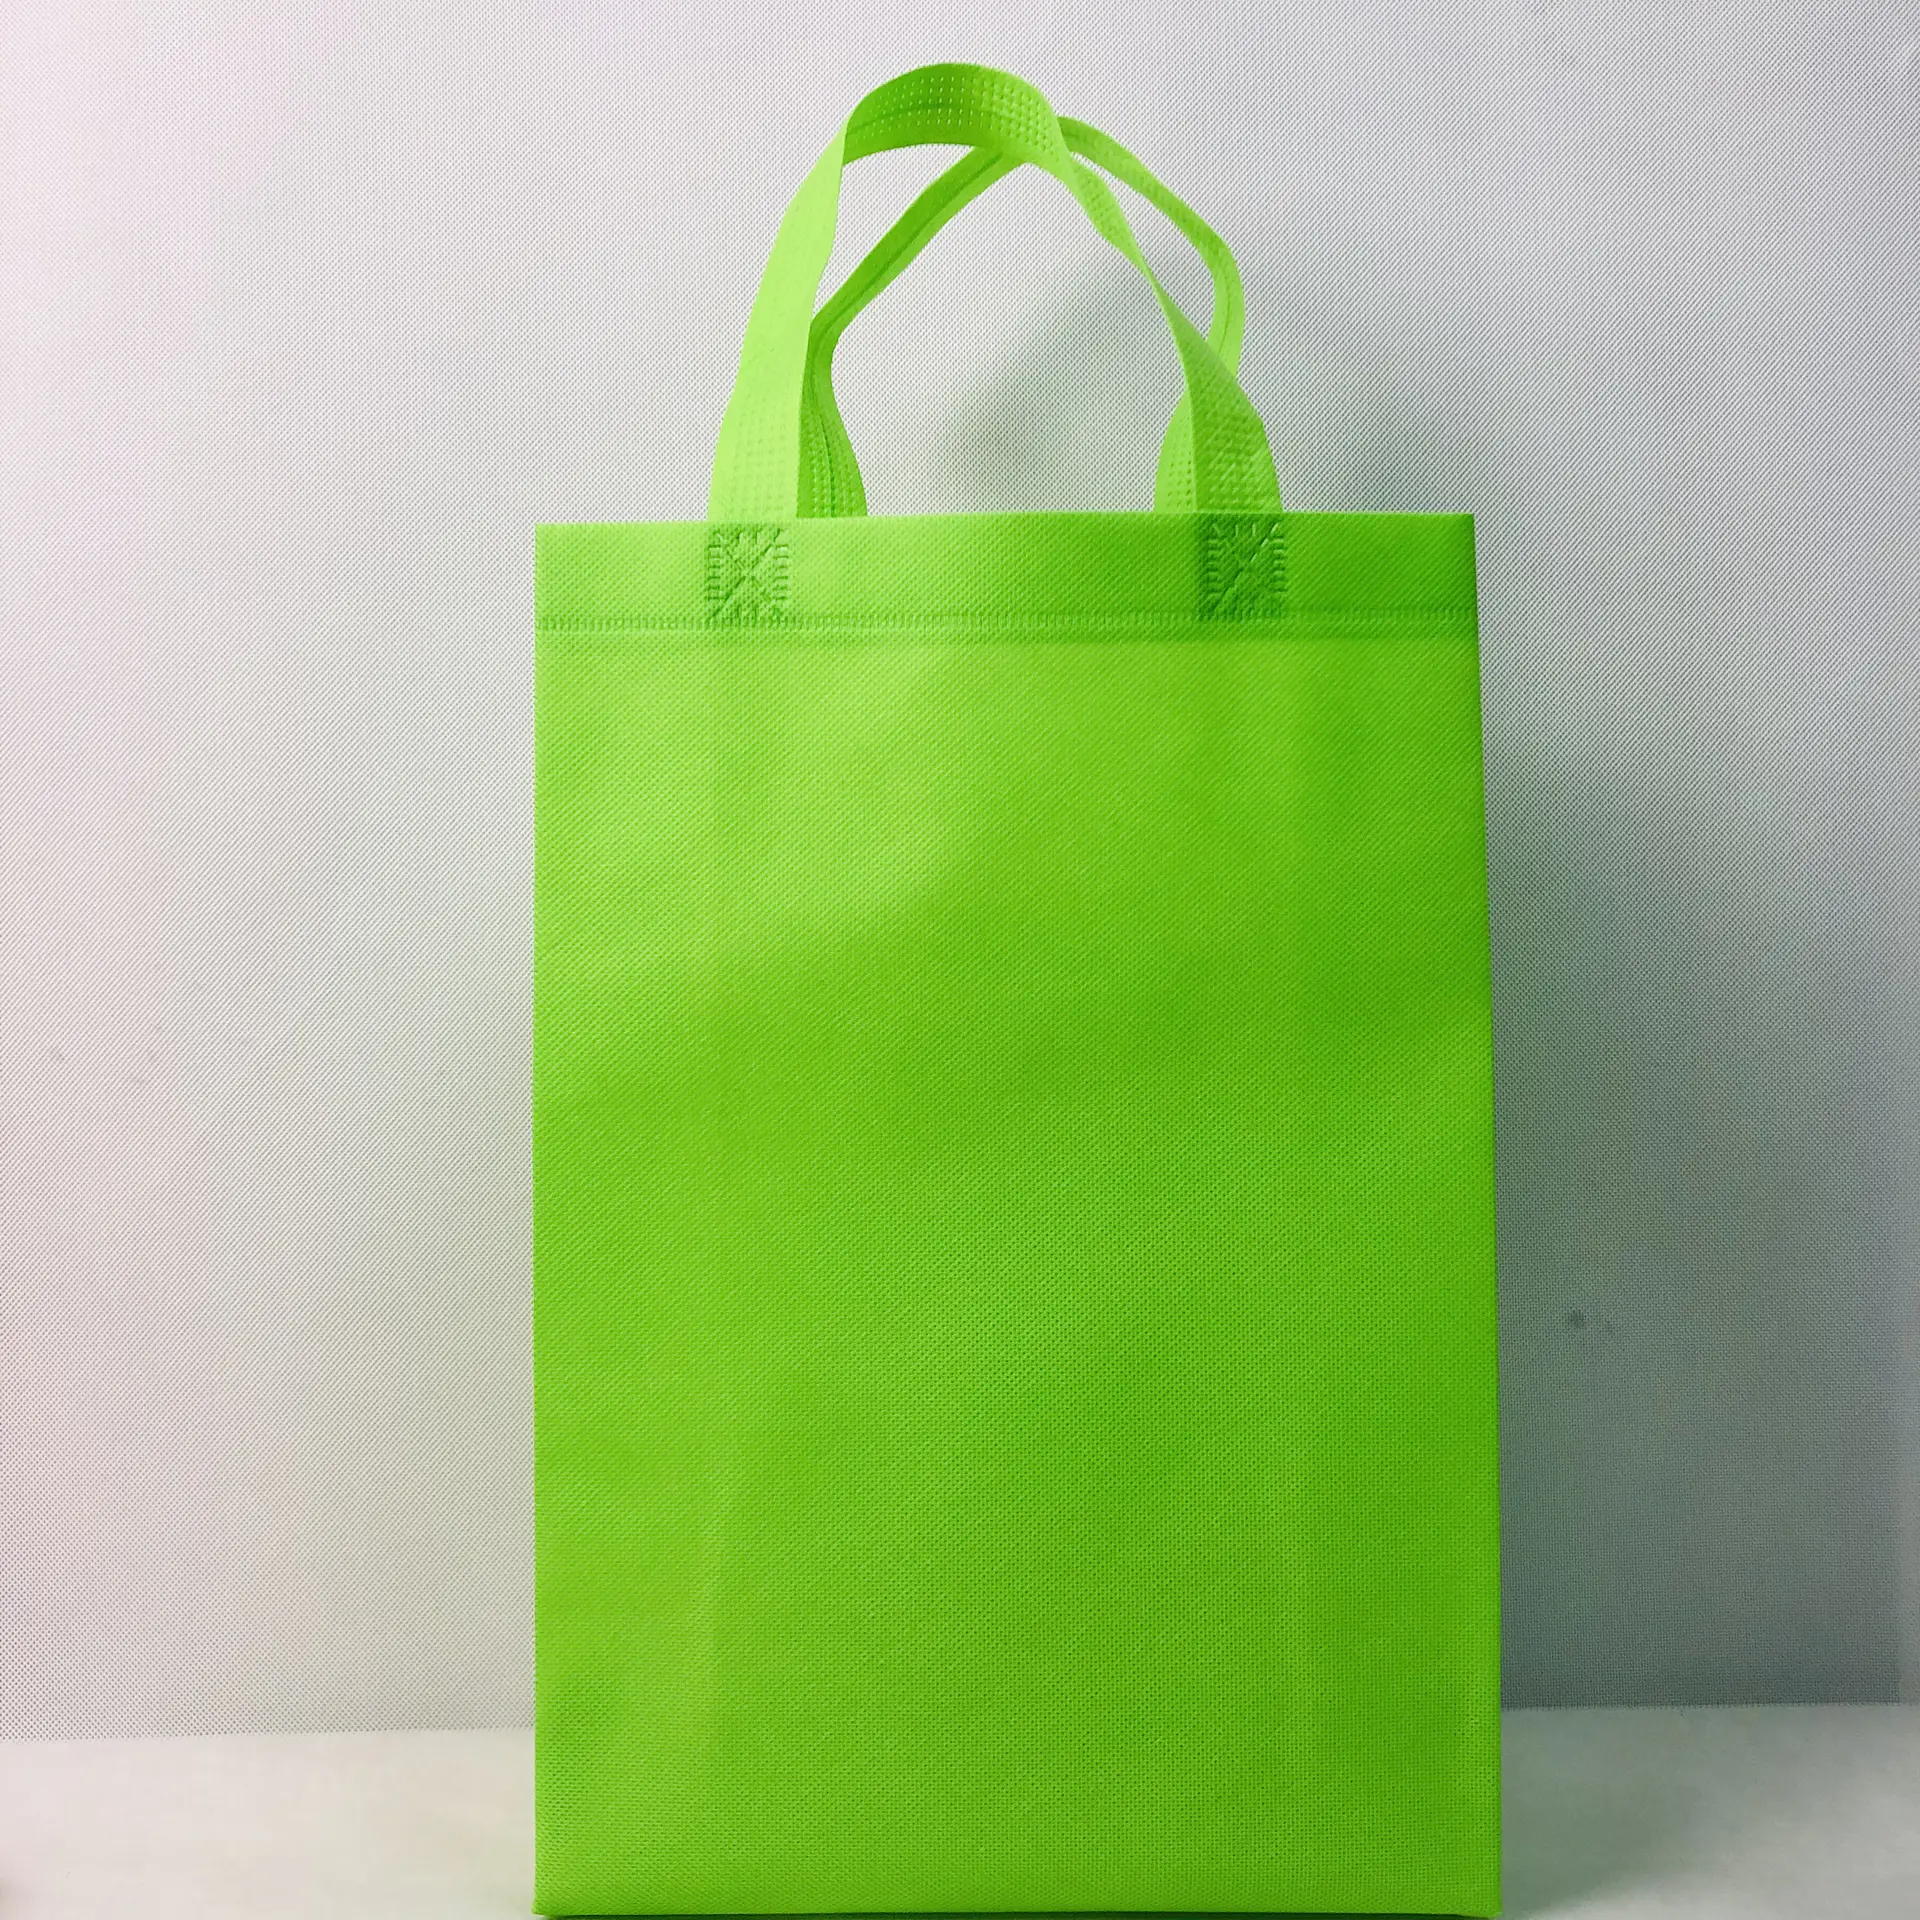 Factory low price direct sales can customize non-woven color handbag